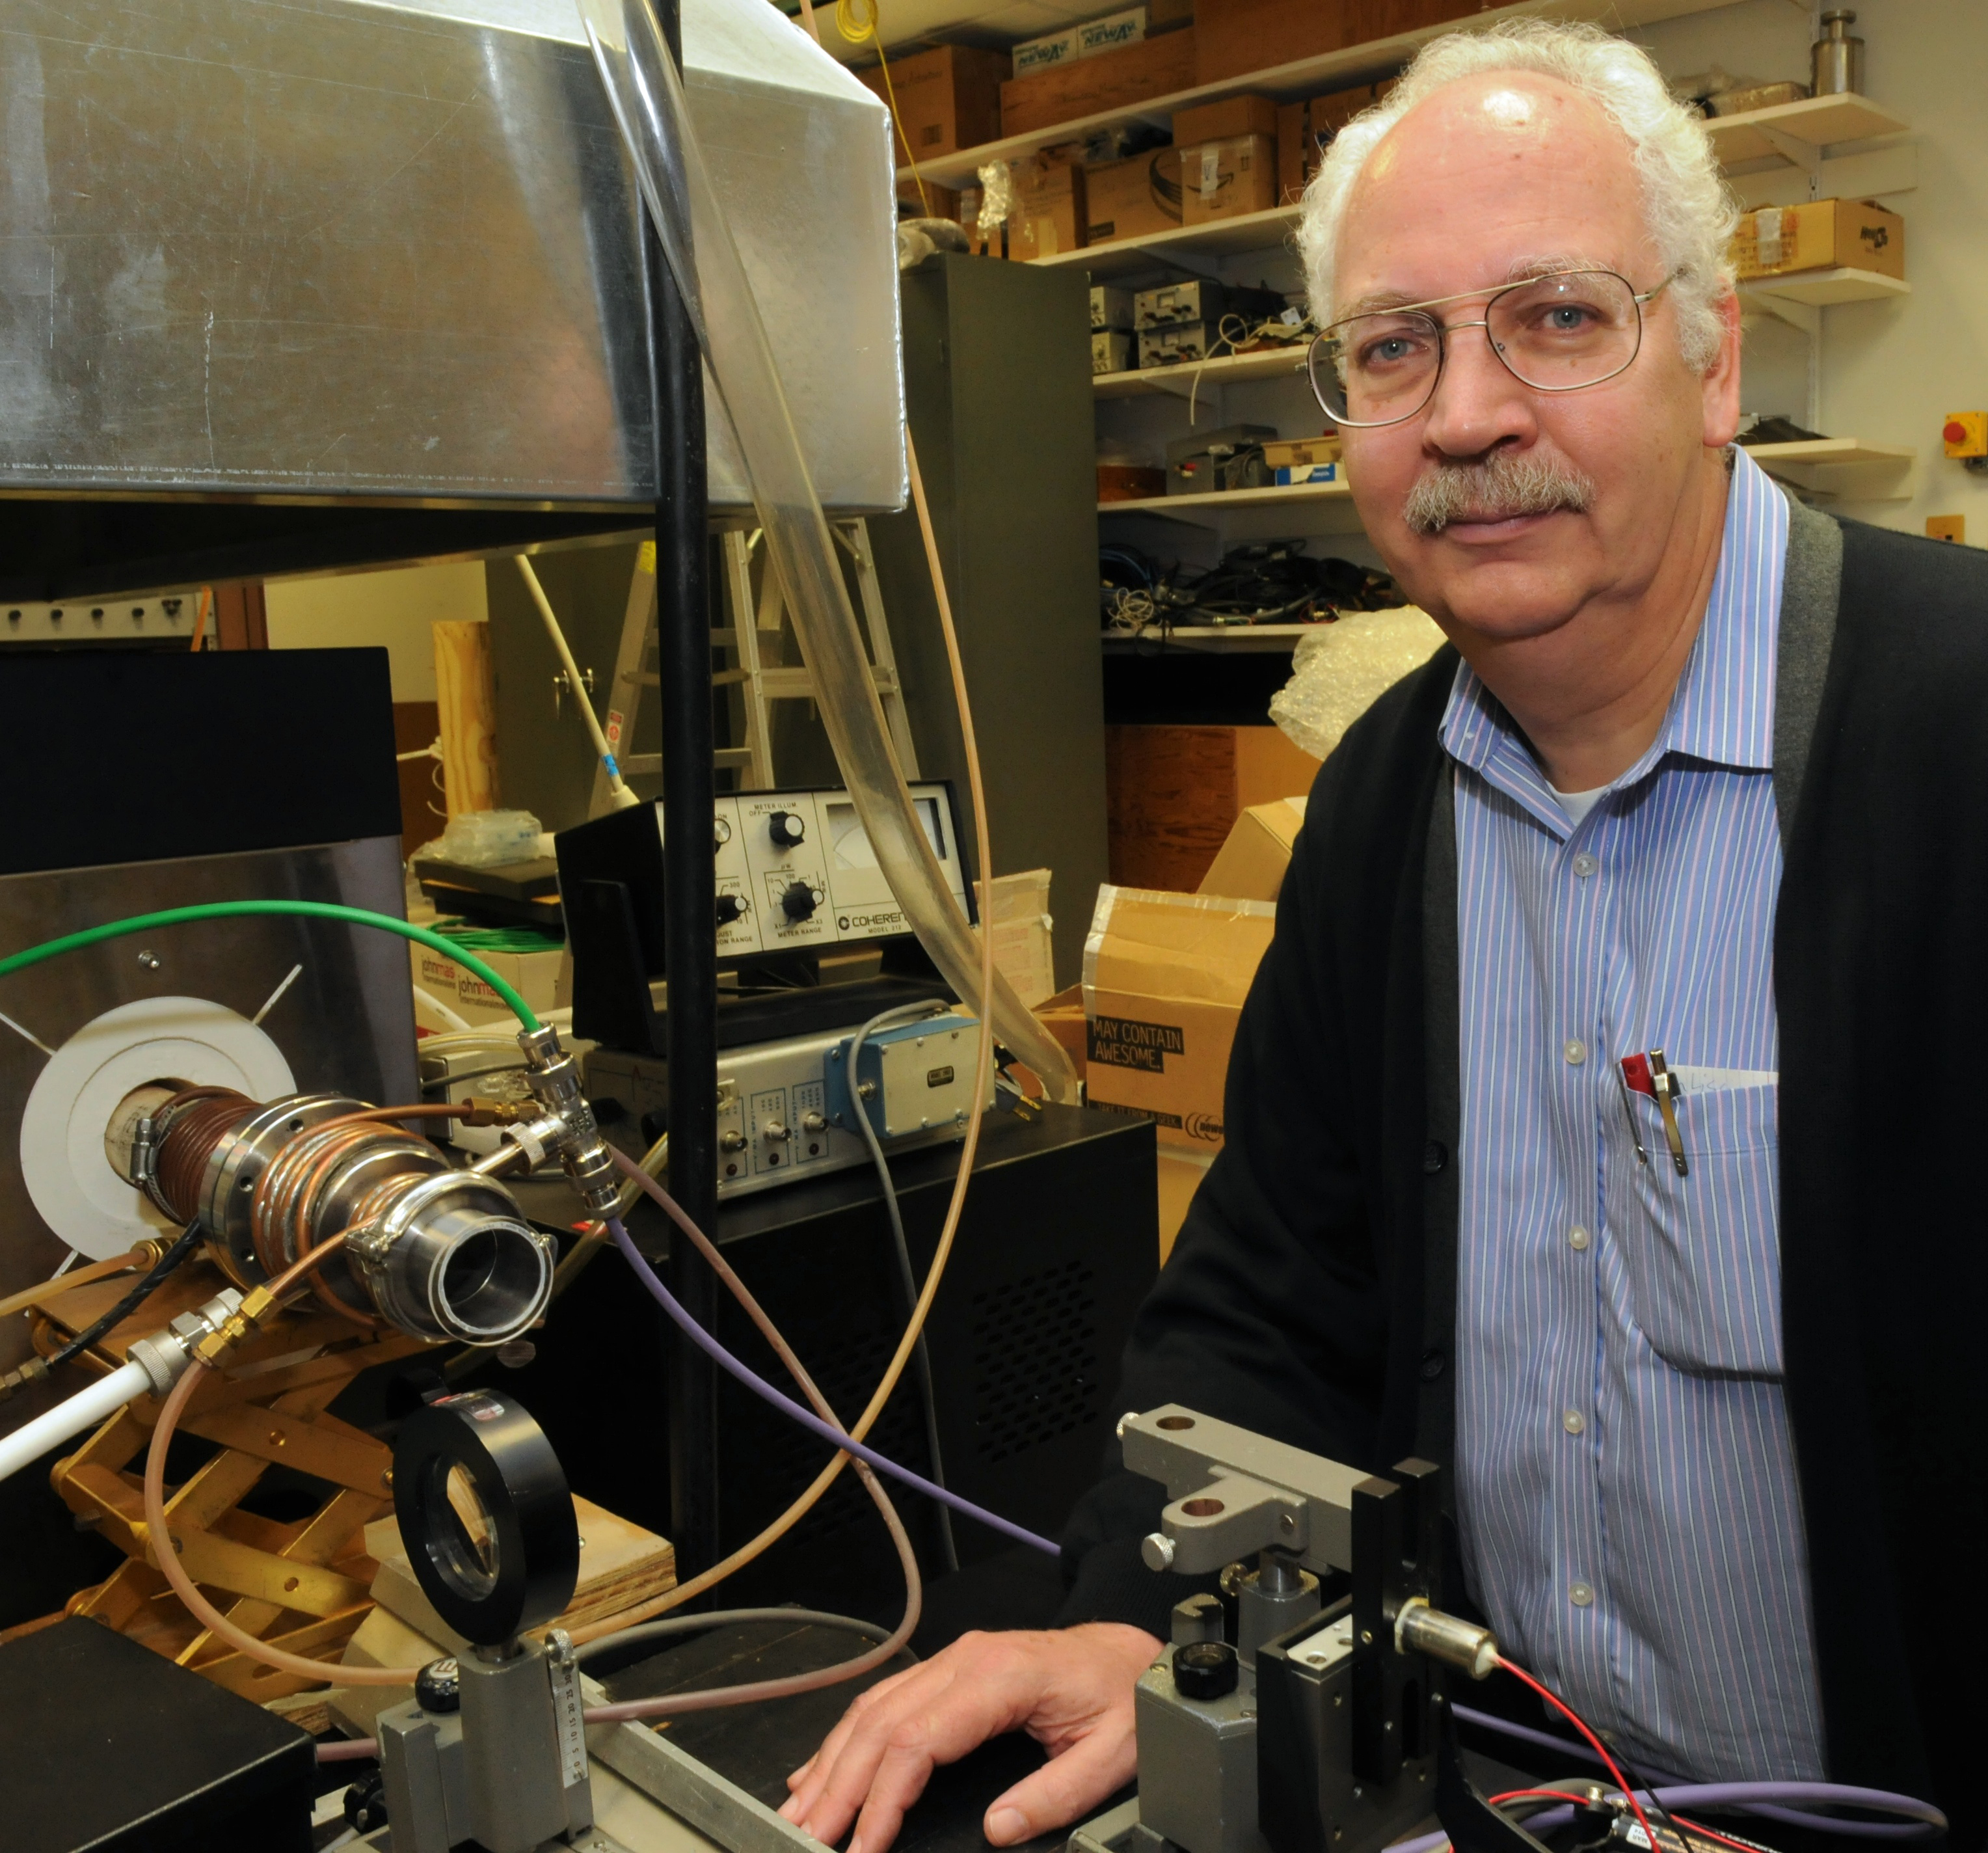 Picture shows ODU's Peter Bernath in a chemistry lab